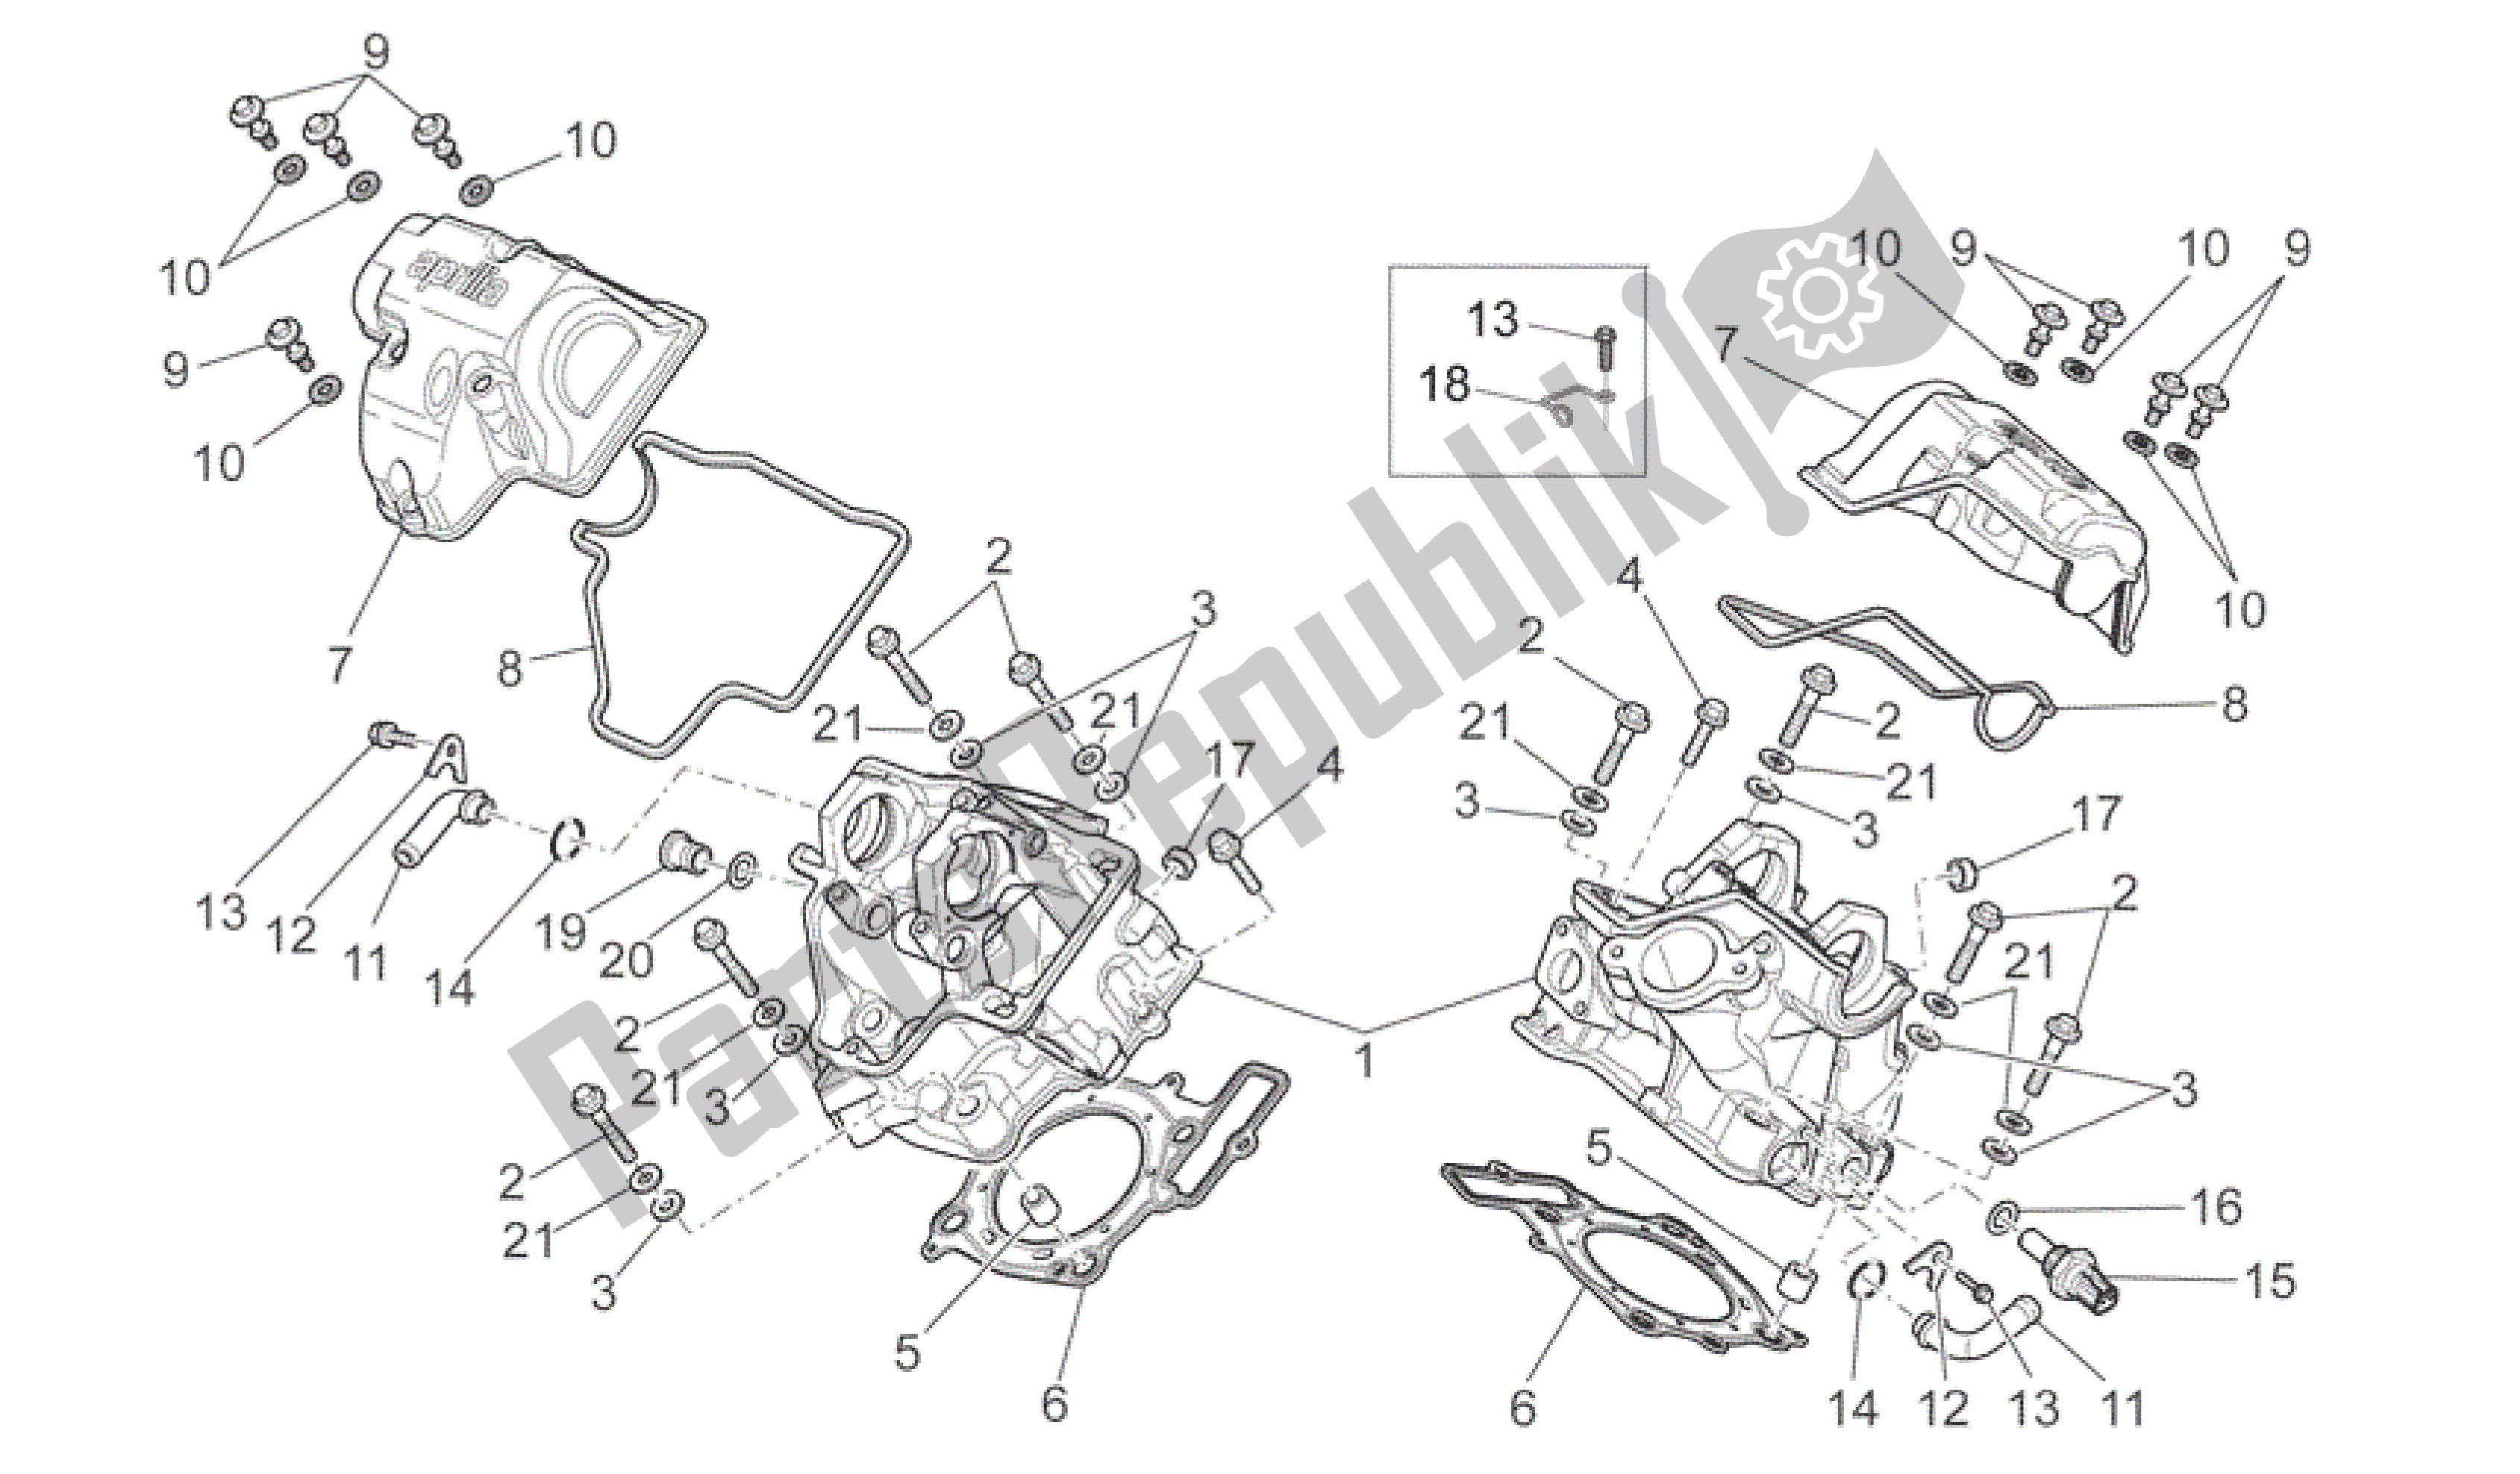 All parts for the Cylinder Head of the Aprilia SXV 550 2009 - 2011